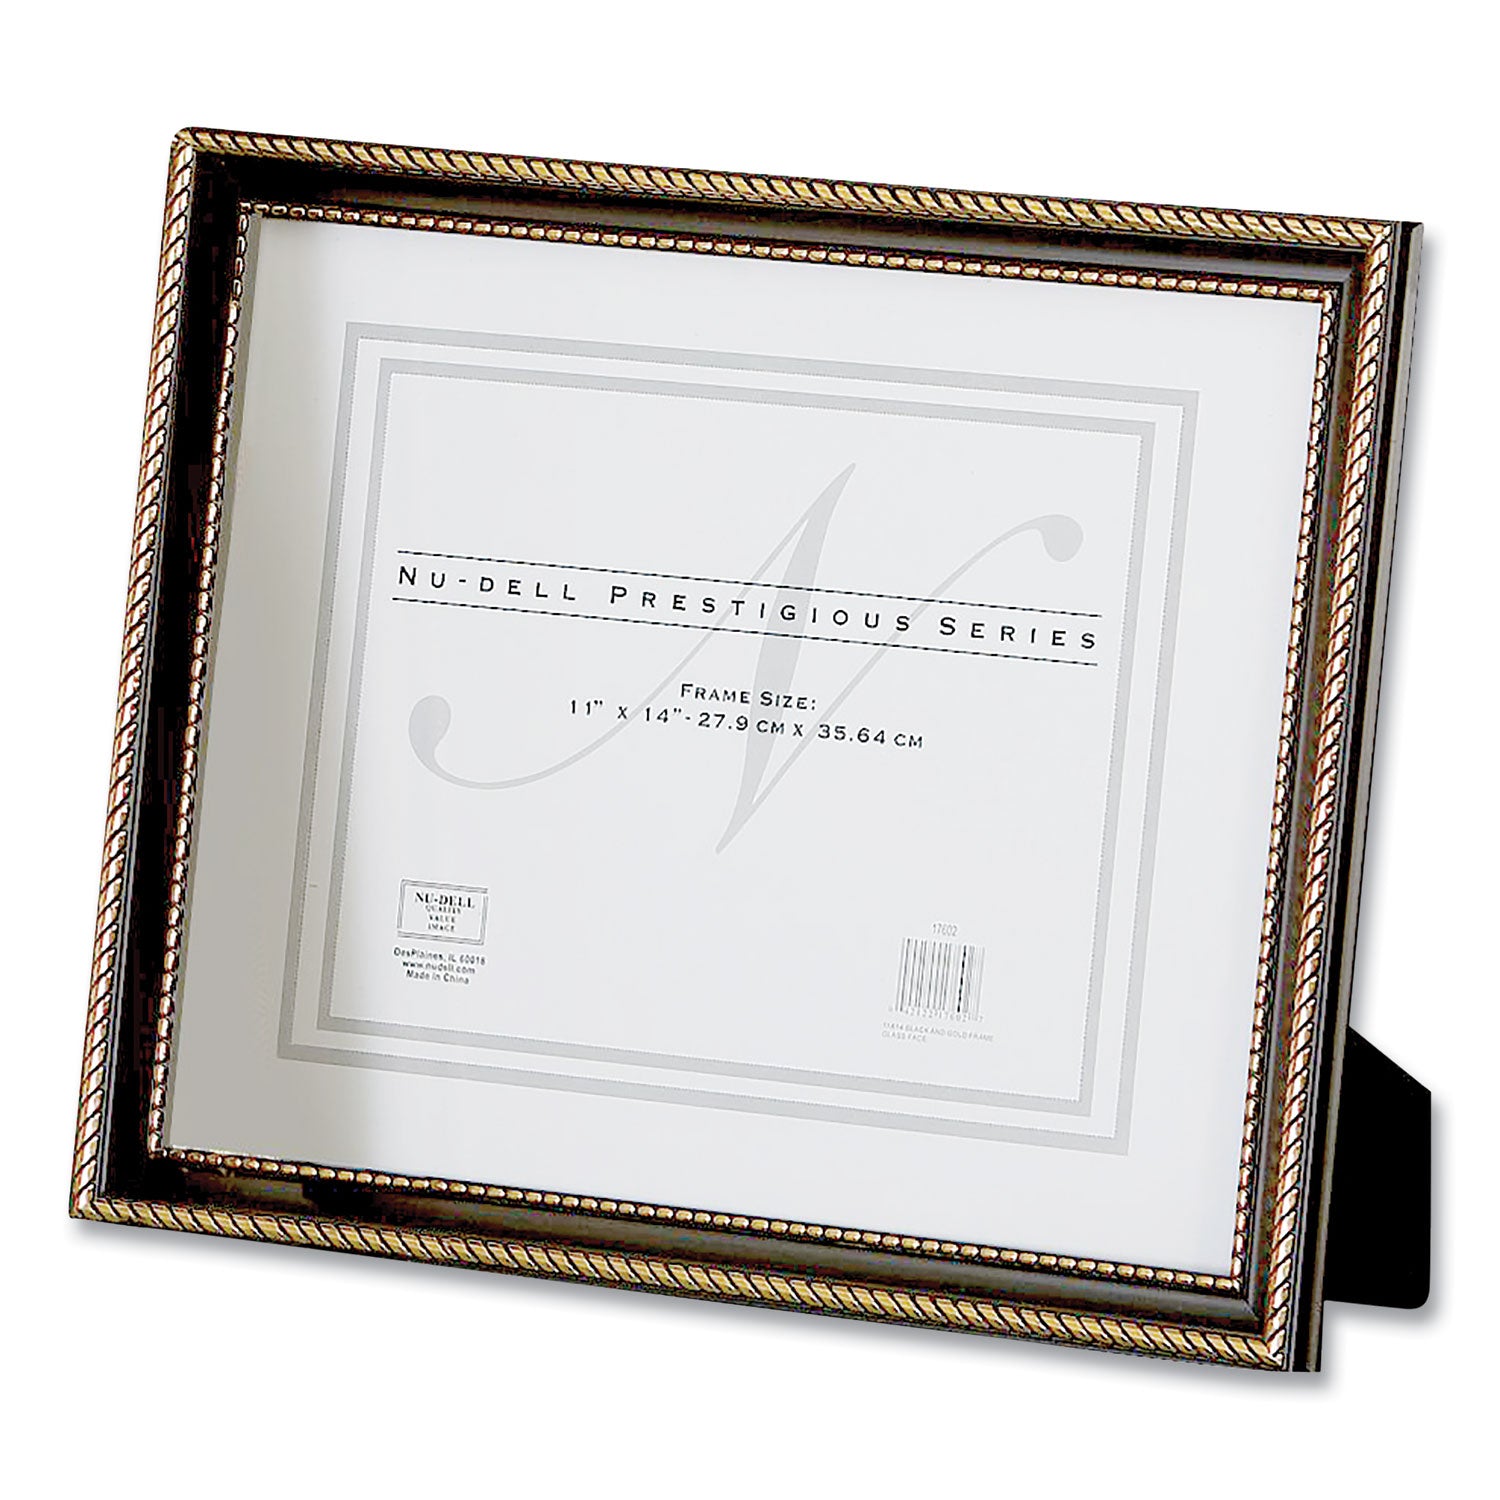 prestige-series-executive-document-and-photo-frame-with-three-way-mat-plastic-11-x-14-insert-black-gold_nud17602 - 2